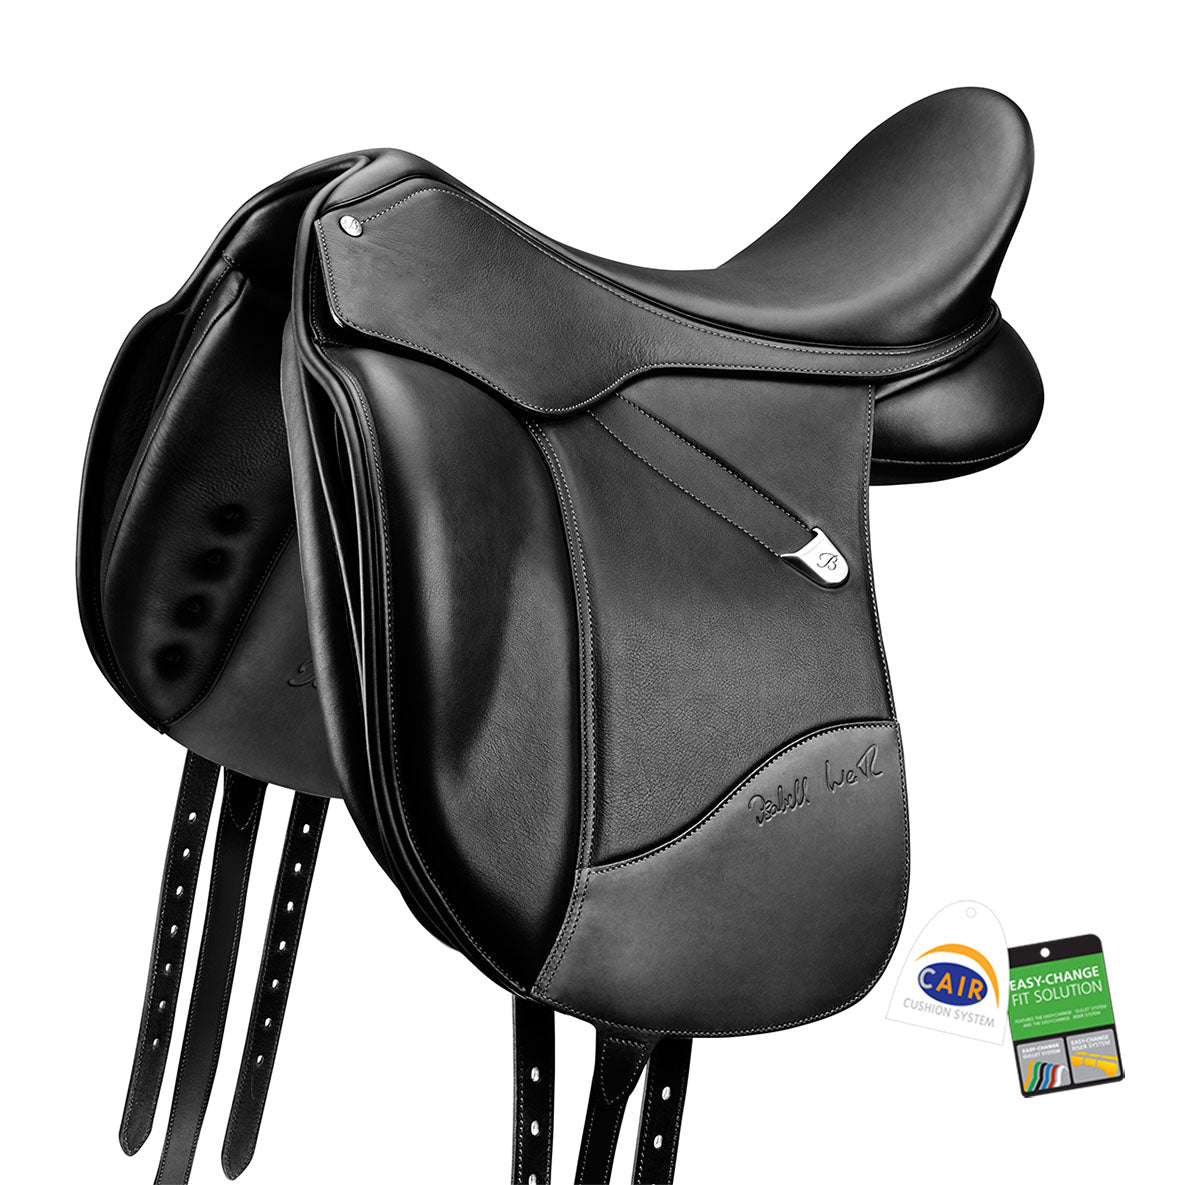 Bates "Isabell" Luxe Leather Dressage Saddle